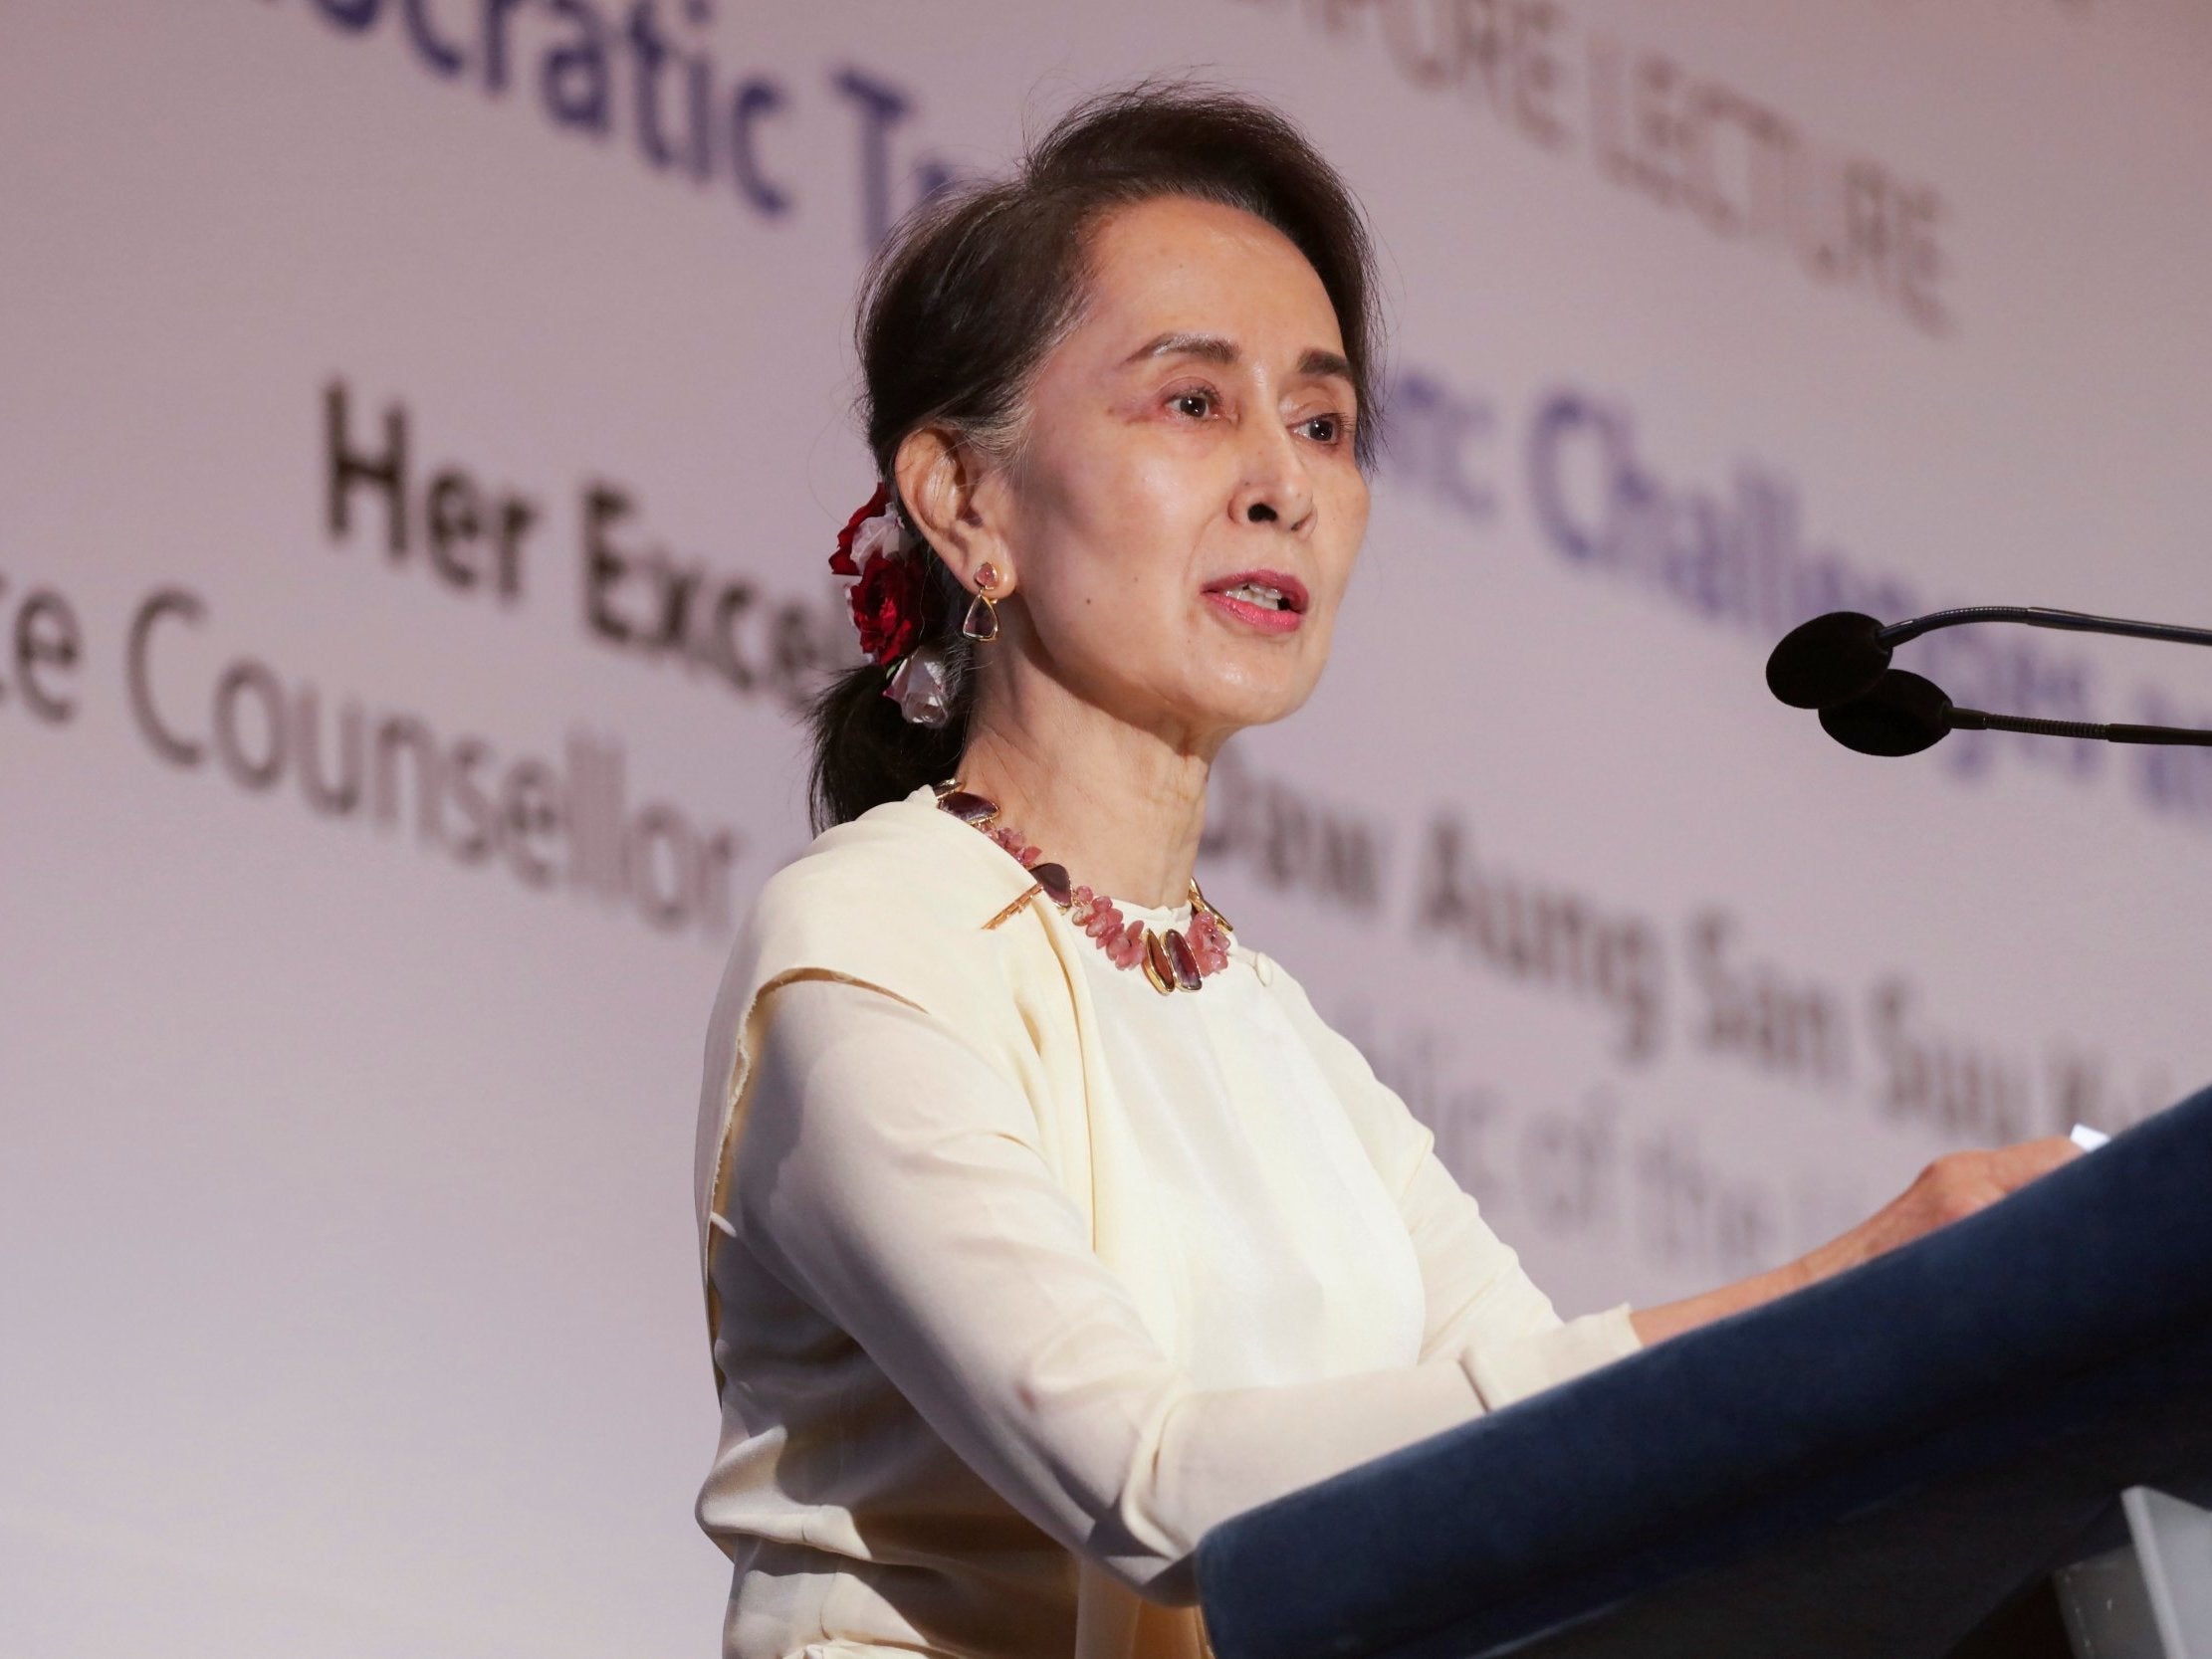 Aung San Suu Kyi won the Nobel Peace Prize in 1991 for campaigning for democracy